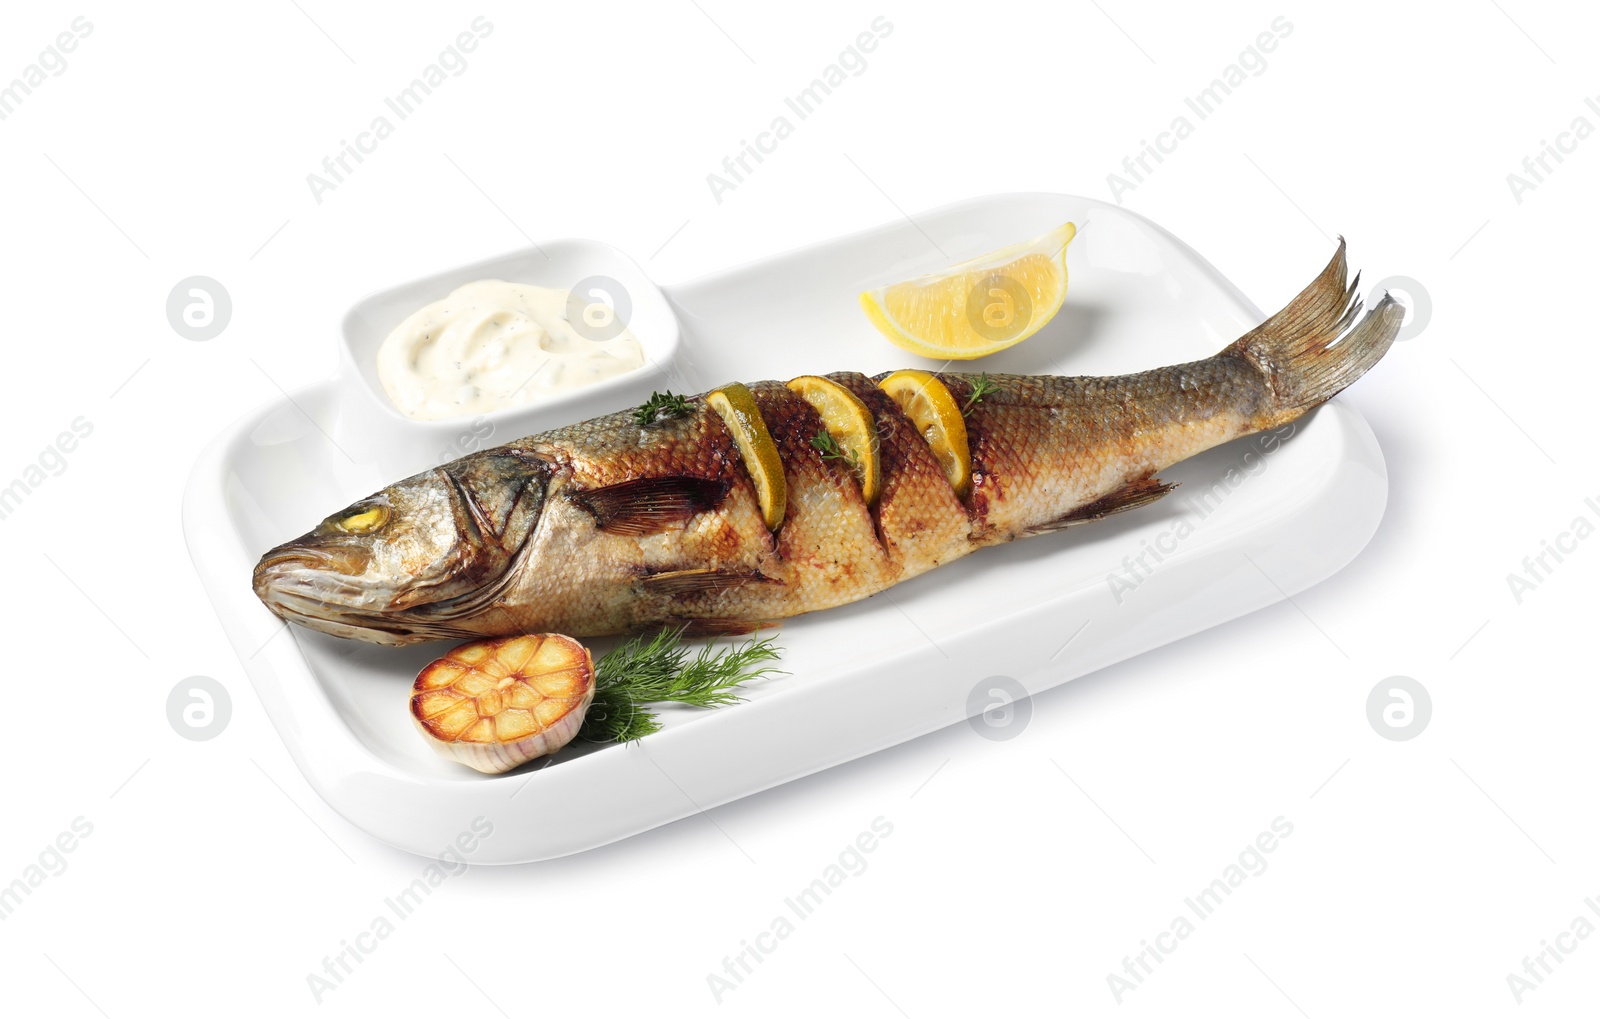 Photo of Plate with delicious roasted sea bass fish, garlic, slice of lemon and sauce on white background